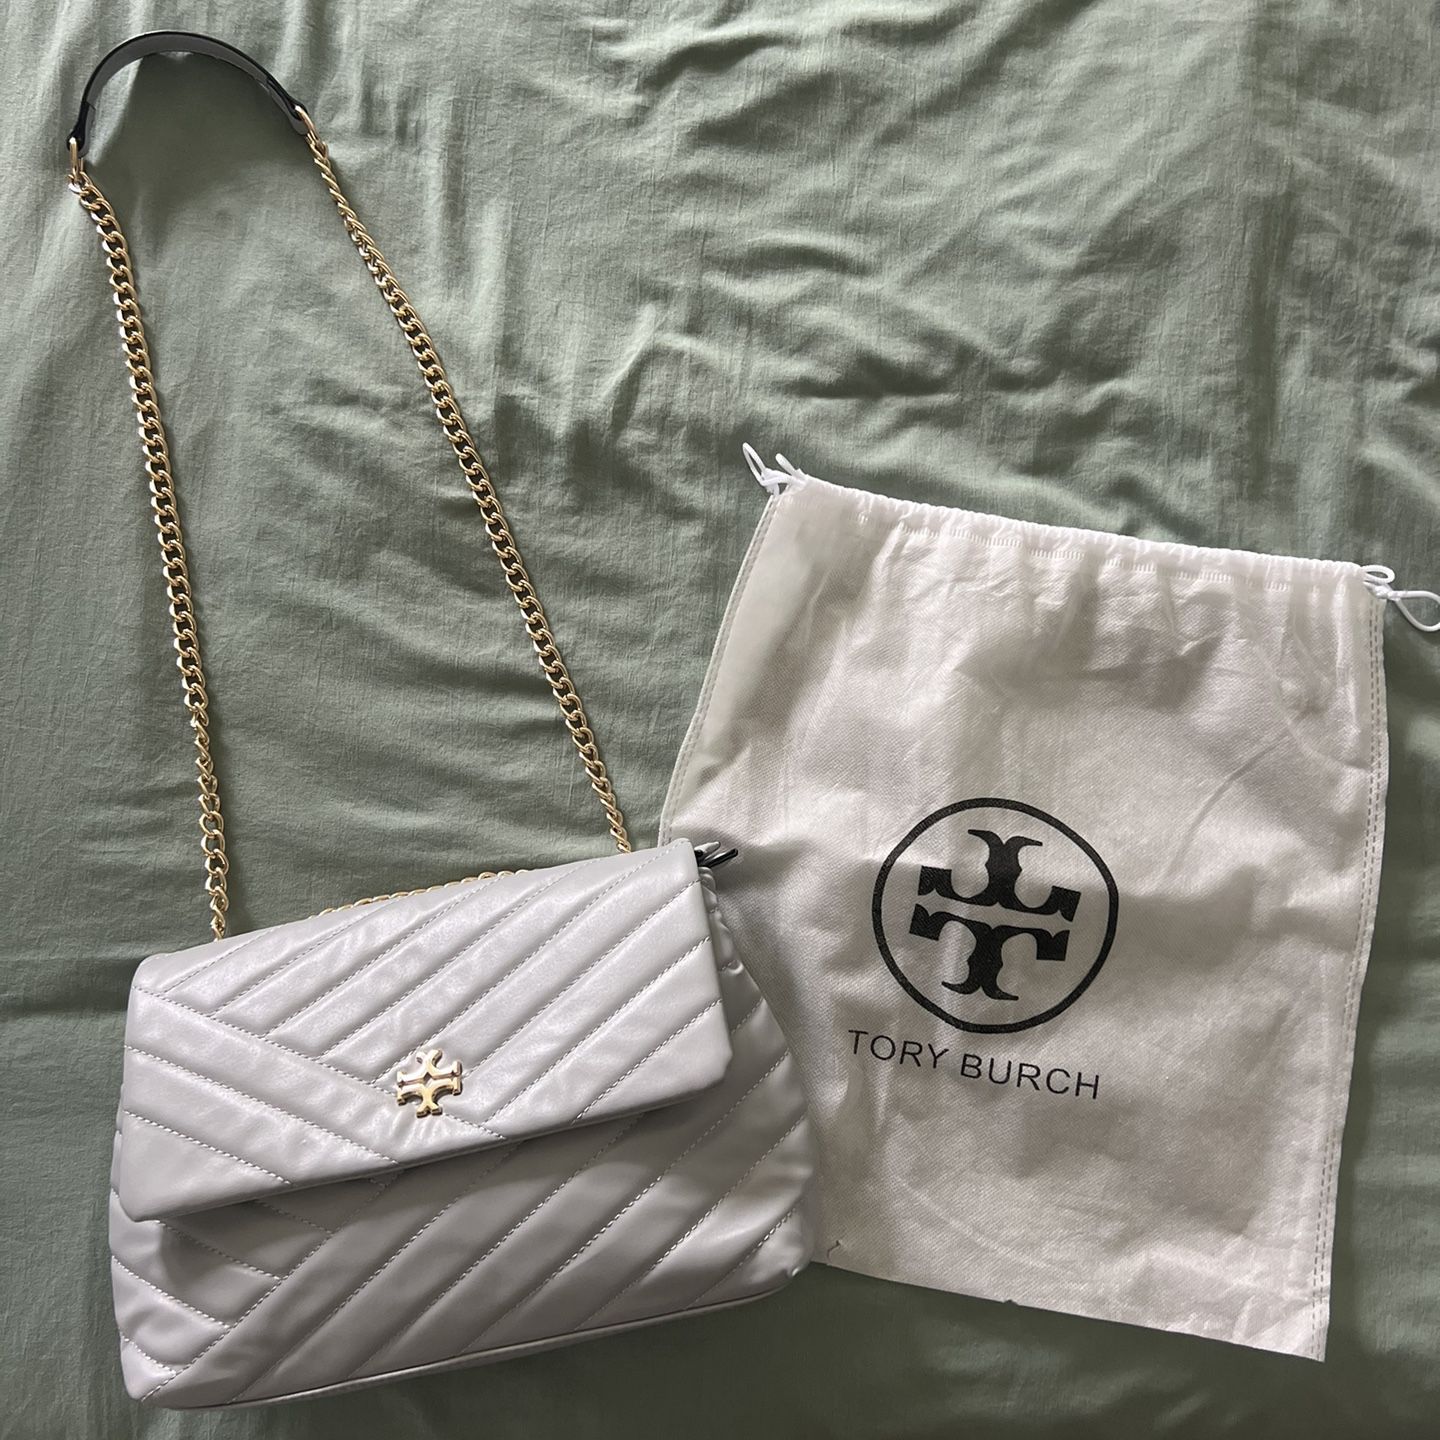 Tory Burch Convertible Shoulder Bag for Sale in Orlando, FL - OfferUp